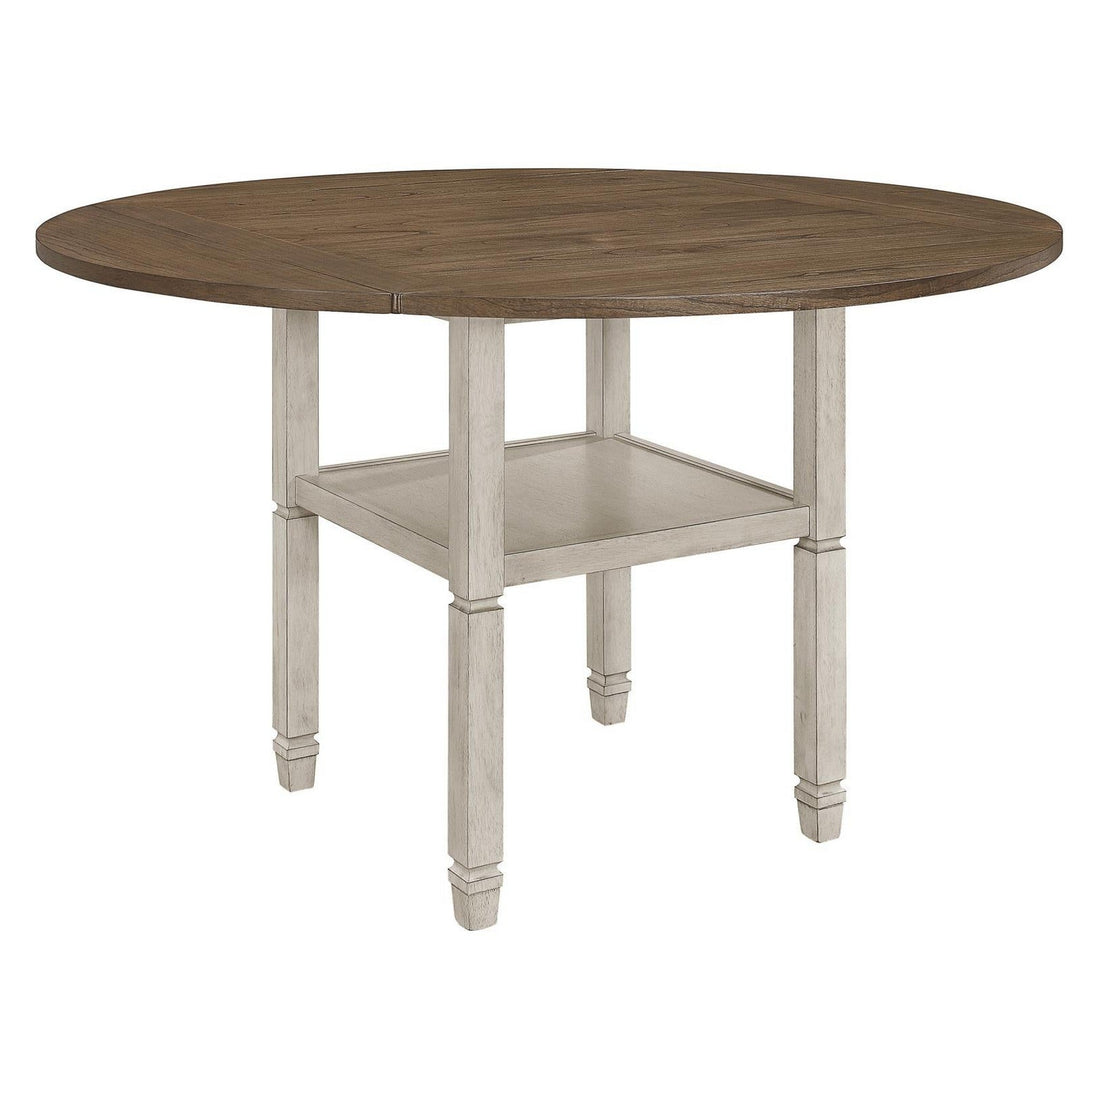 Sarasota Counter Height Table with Shelf Storage Nutmeg and Rustic Cream 192818